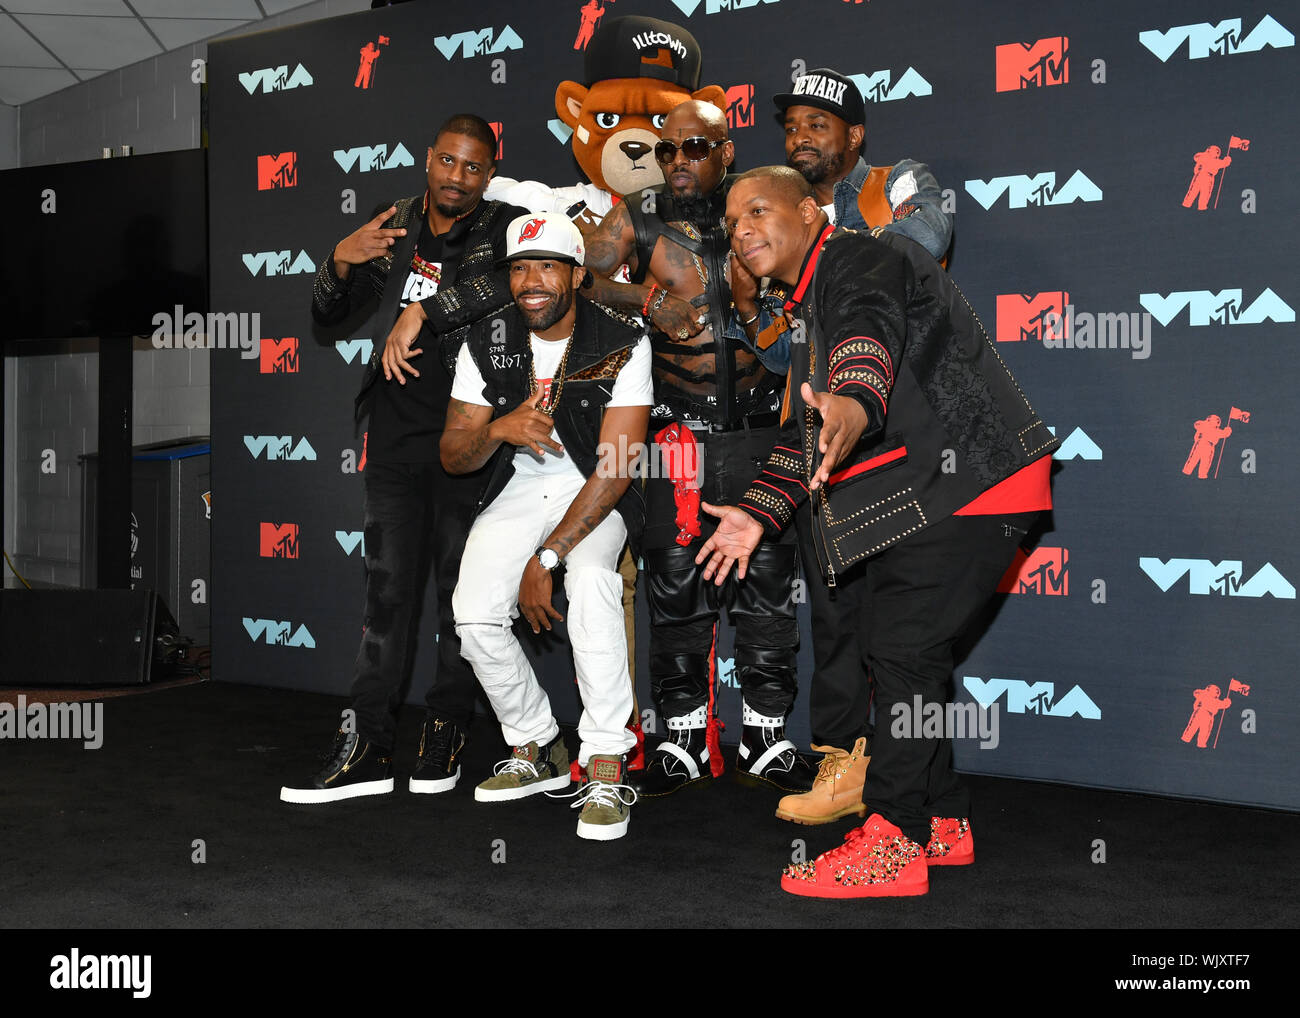 Naughty By Nature, Redman attends the 2019 MTV Video Music Awards at Prudential Center on August 26, 2019 in Newark, New Jersey. Stock Photo